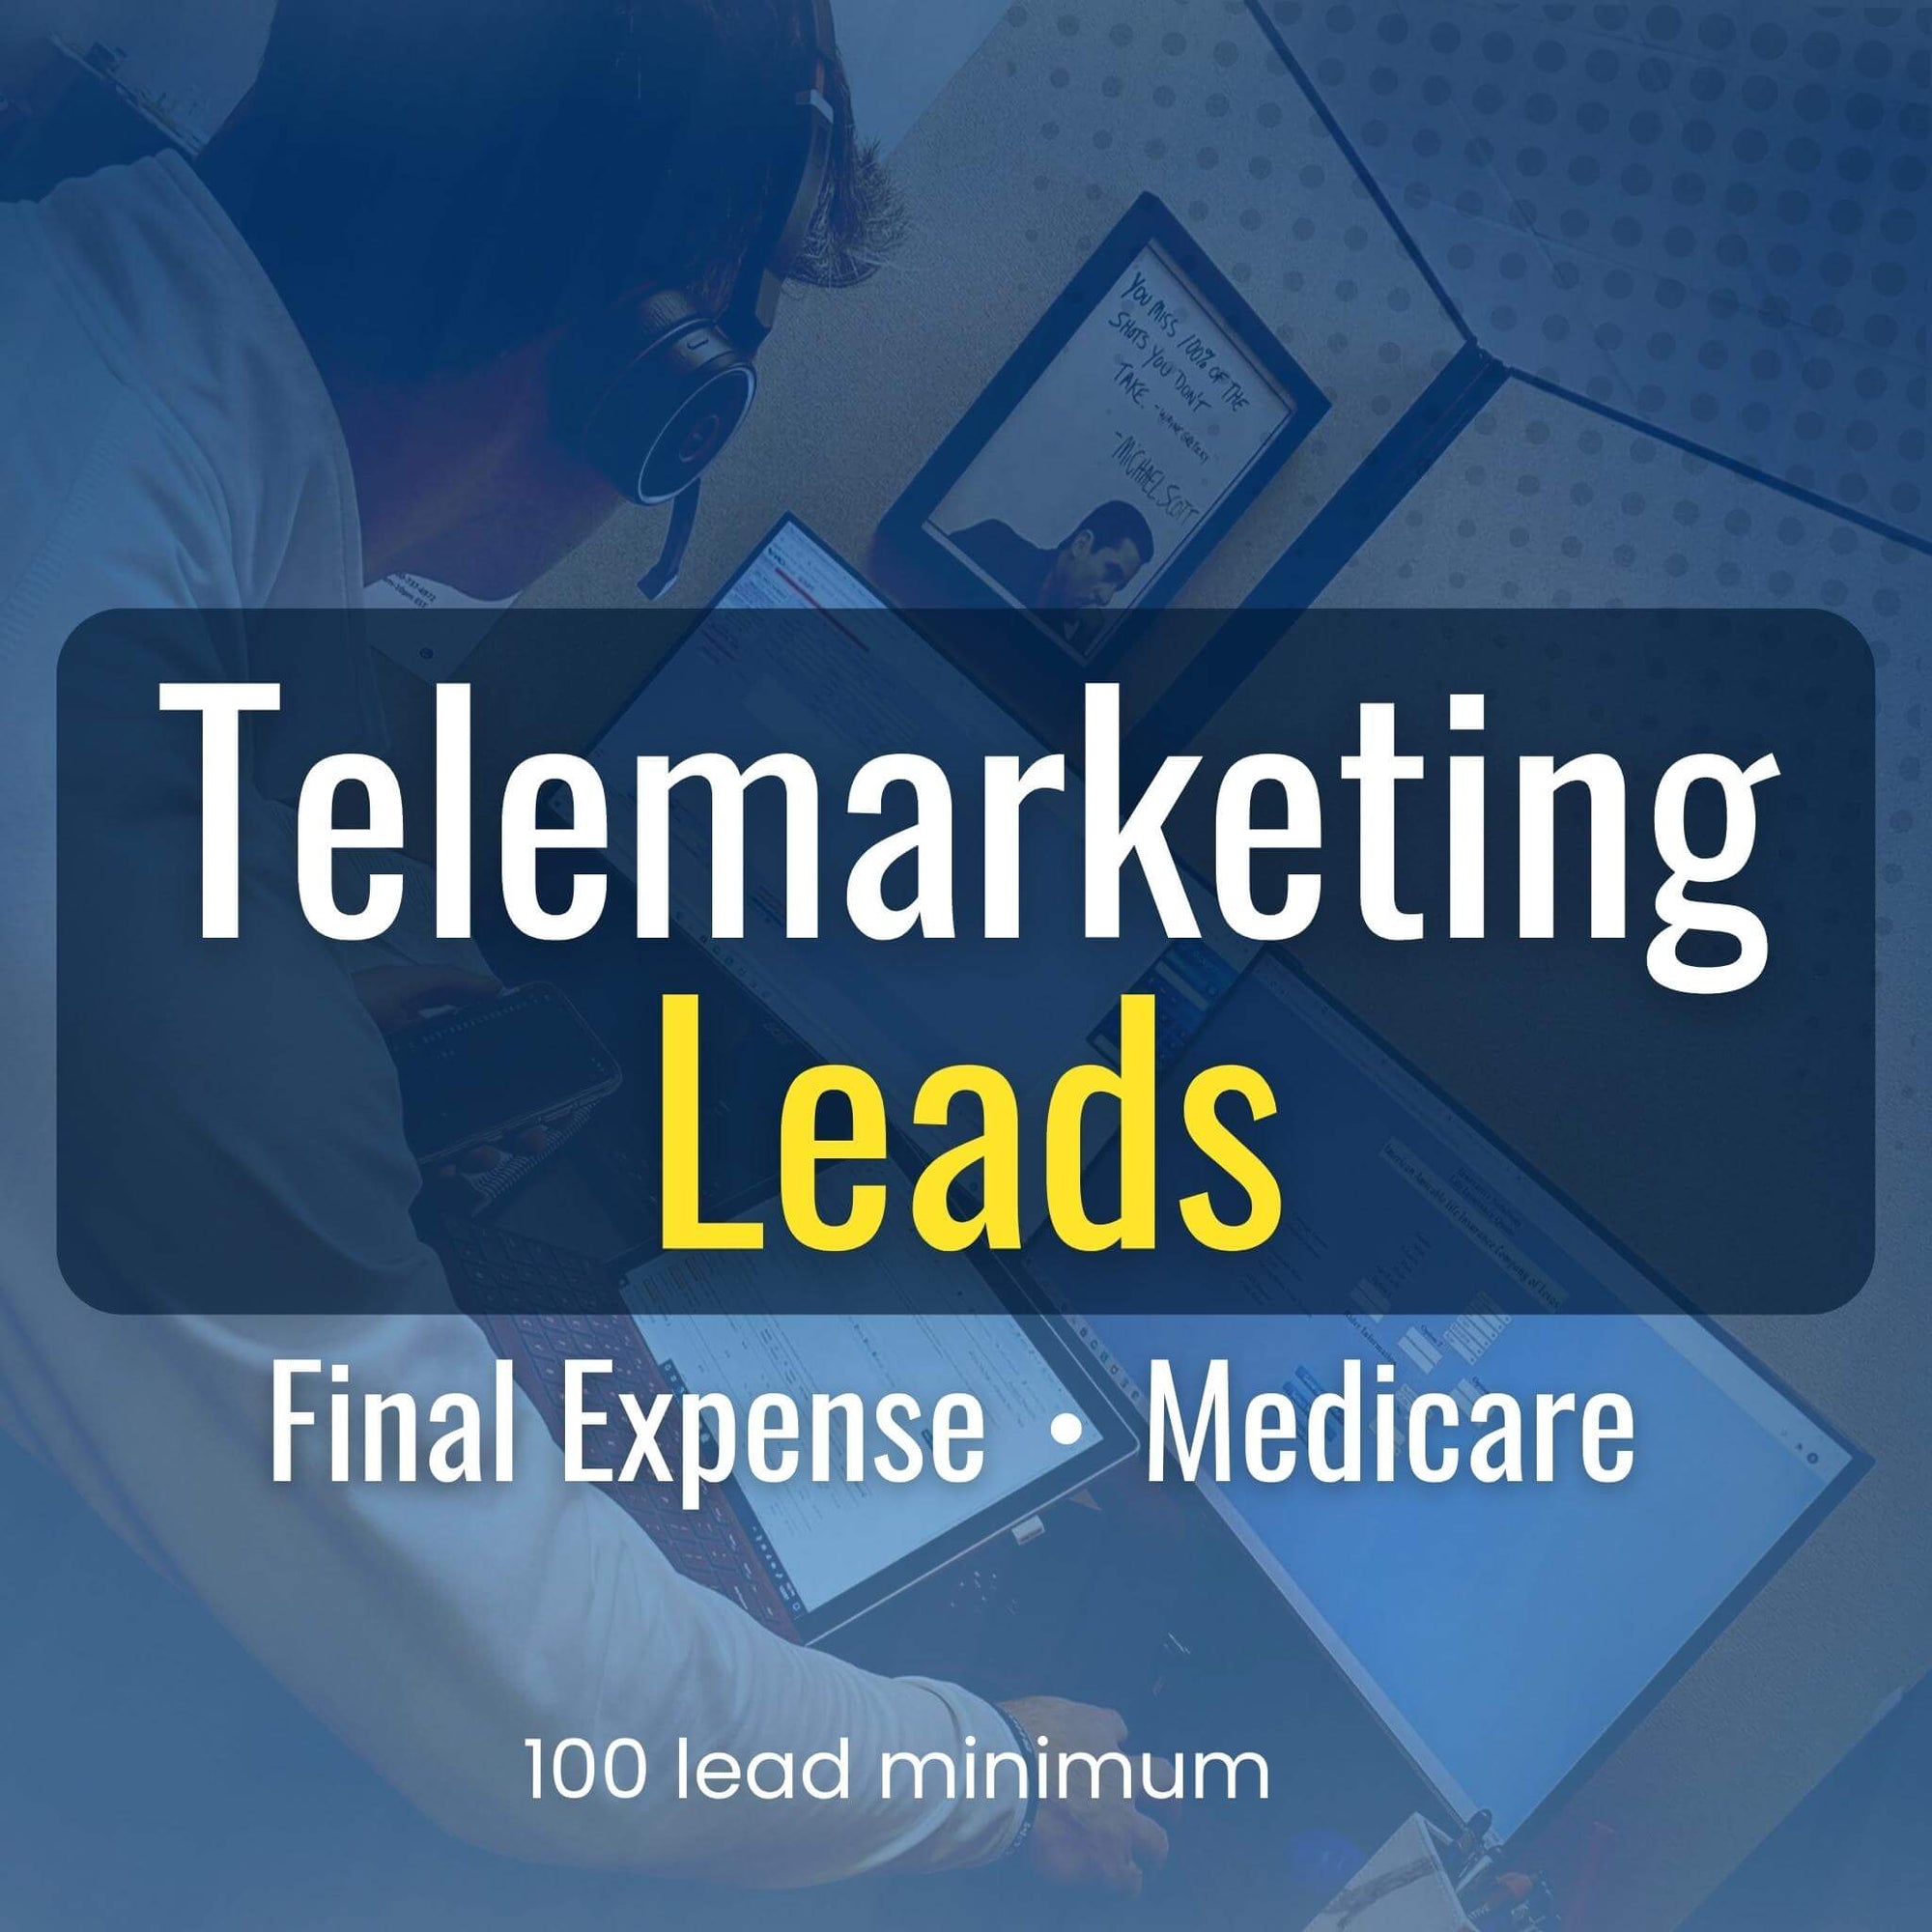 Telemarketing Leads - All Things Insurance Group